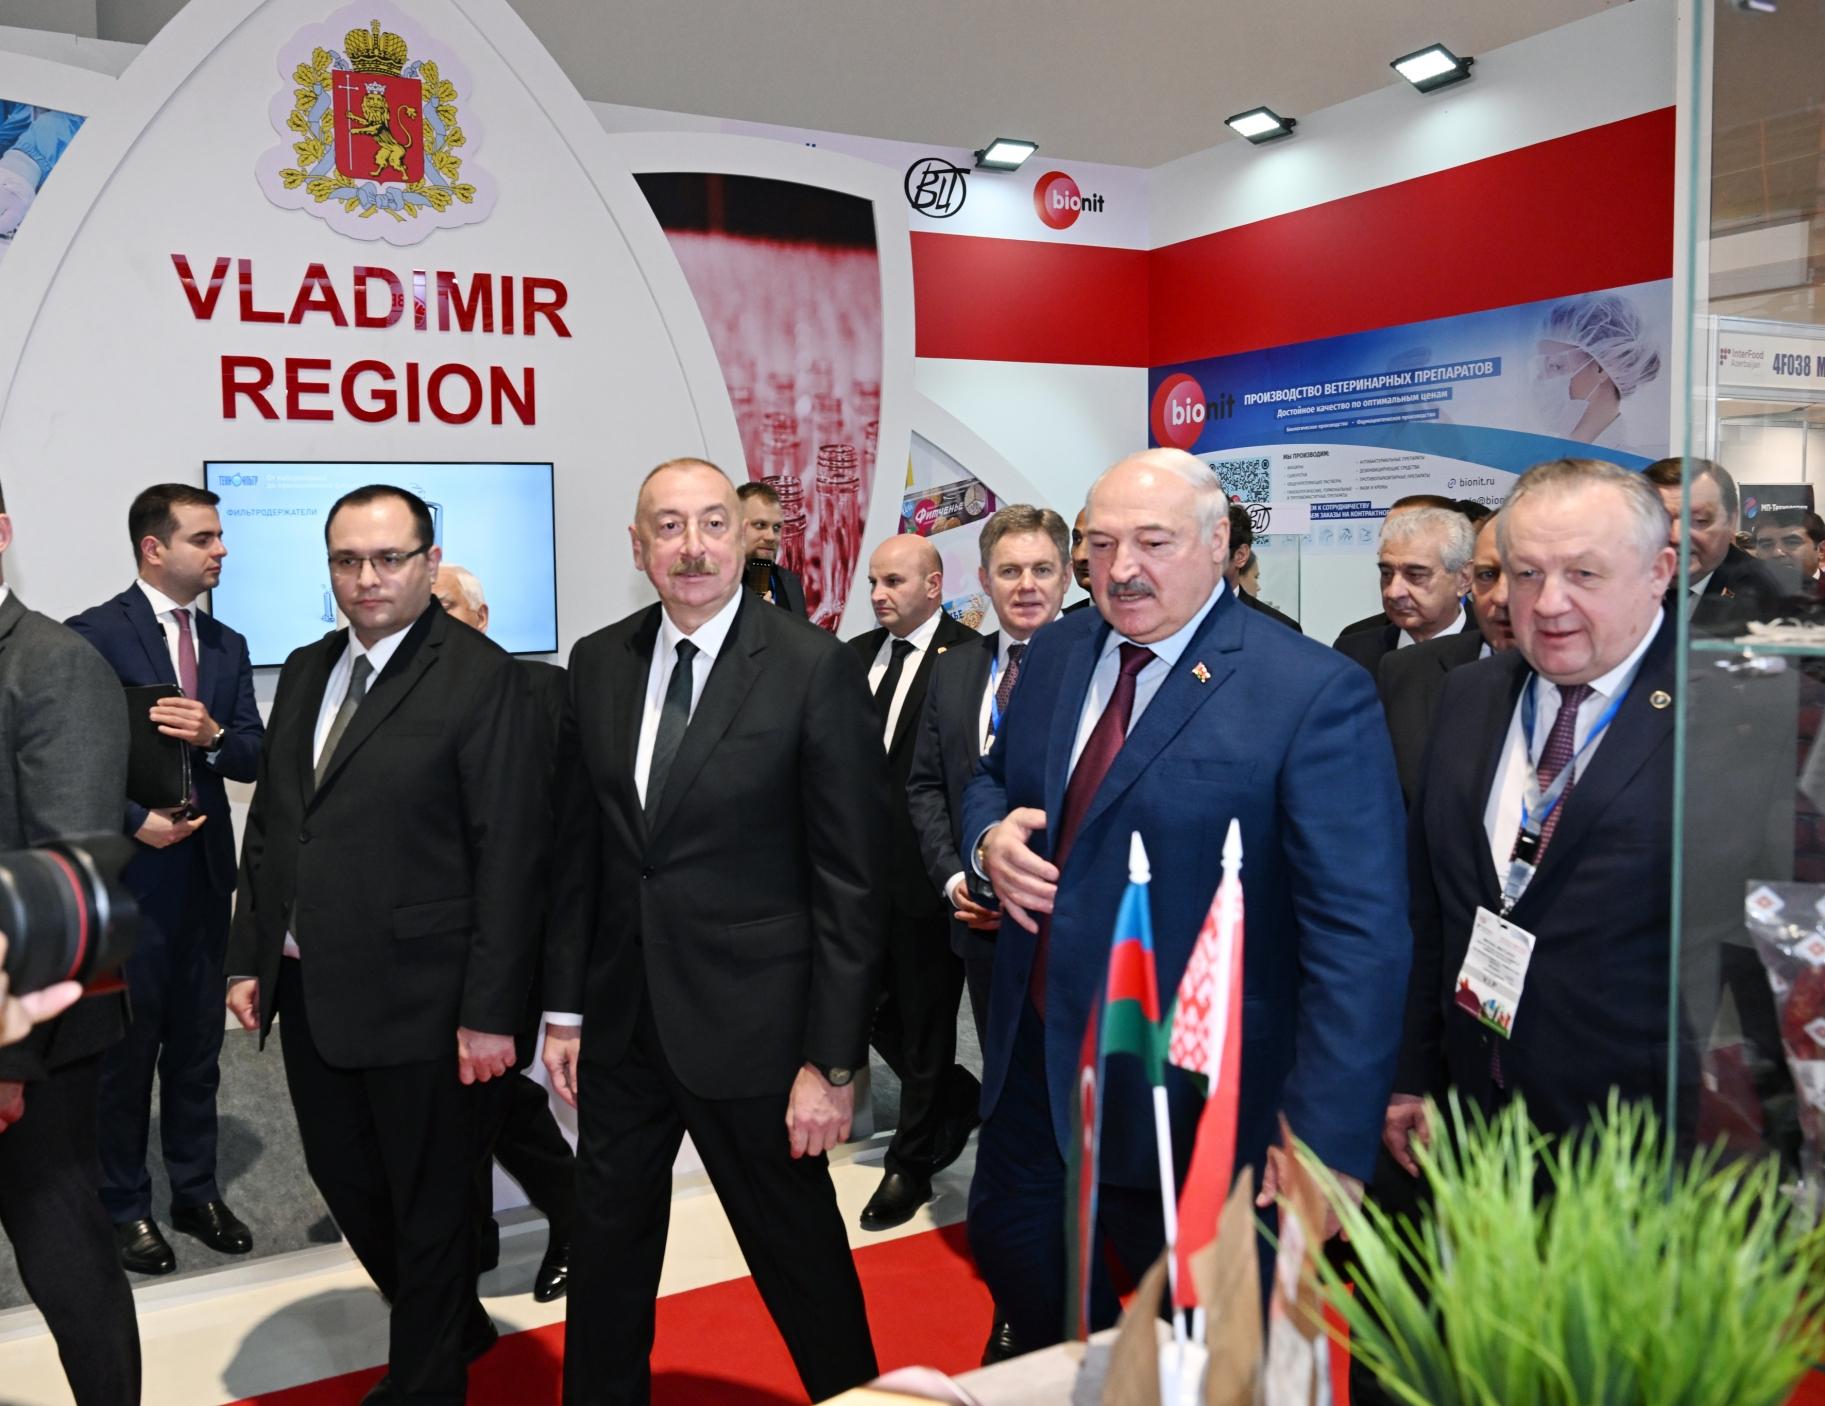 Presidents of Azerbaijan and Belarus familiarize themselves with Caspian Agro and InterFood Azerbaijan exhibitions